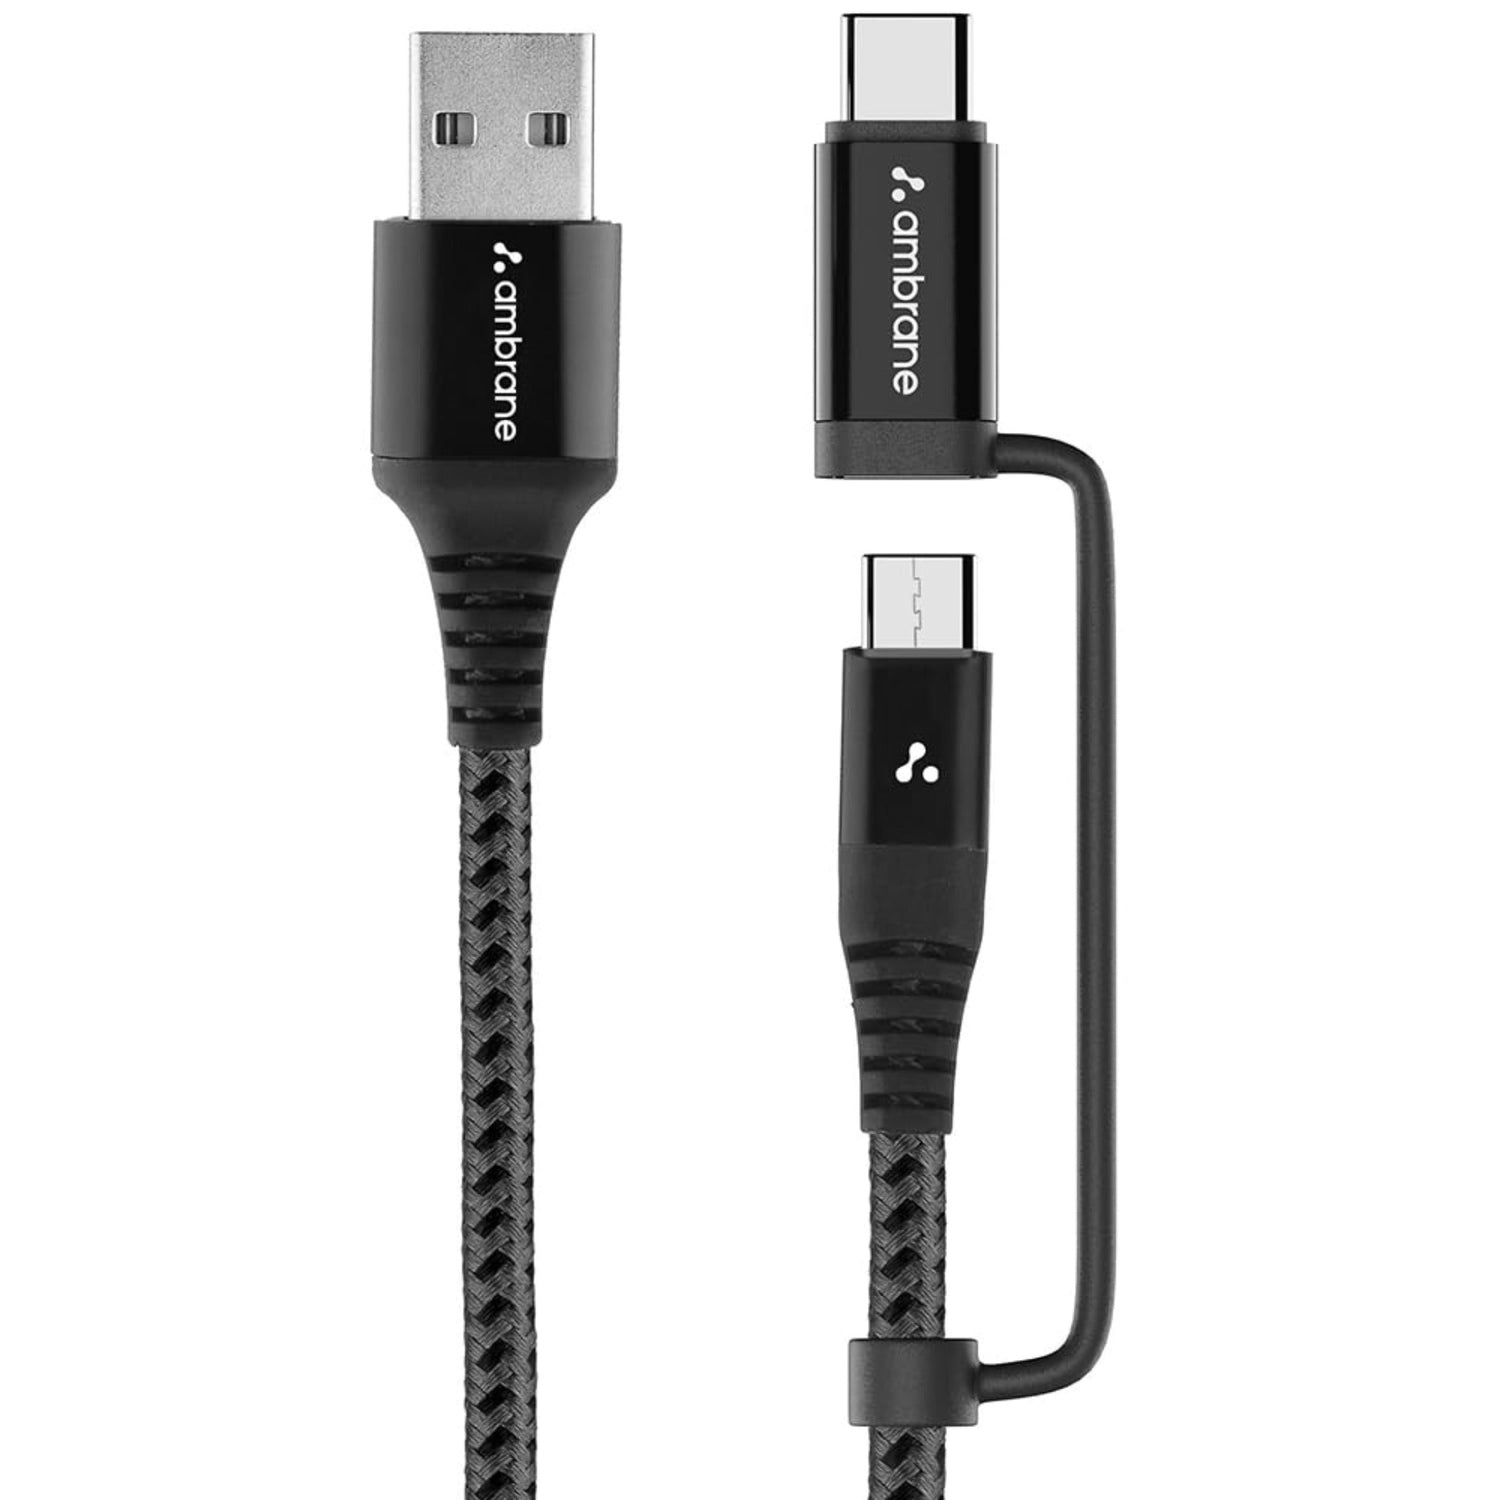 Ambrane 2 in 1 Braided Cable (1.5 M) - ABDC-10